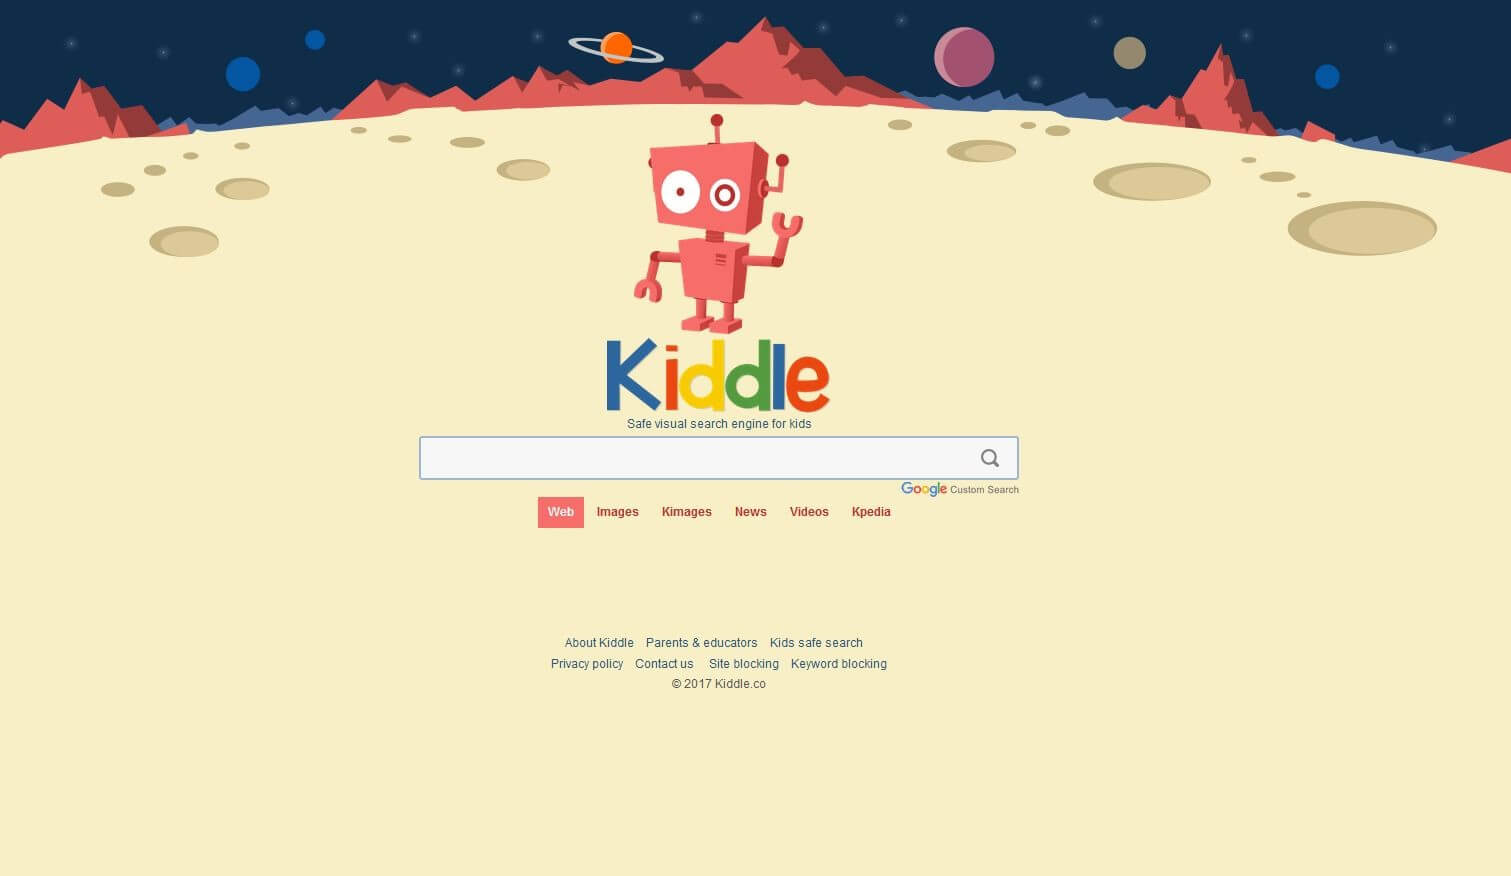 Homepage of the search engine Kiddle